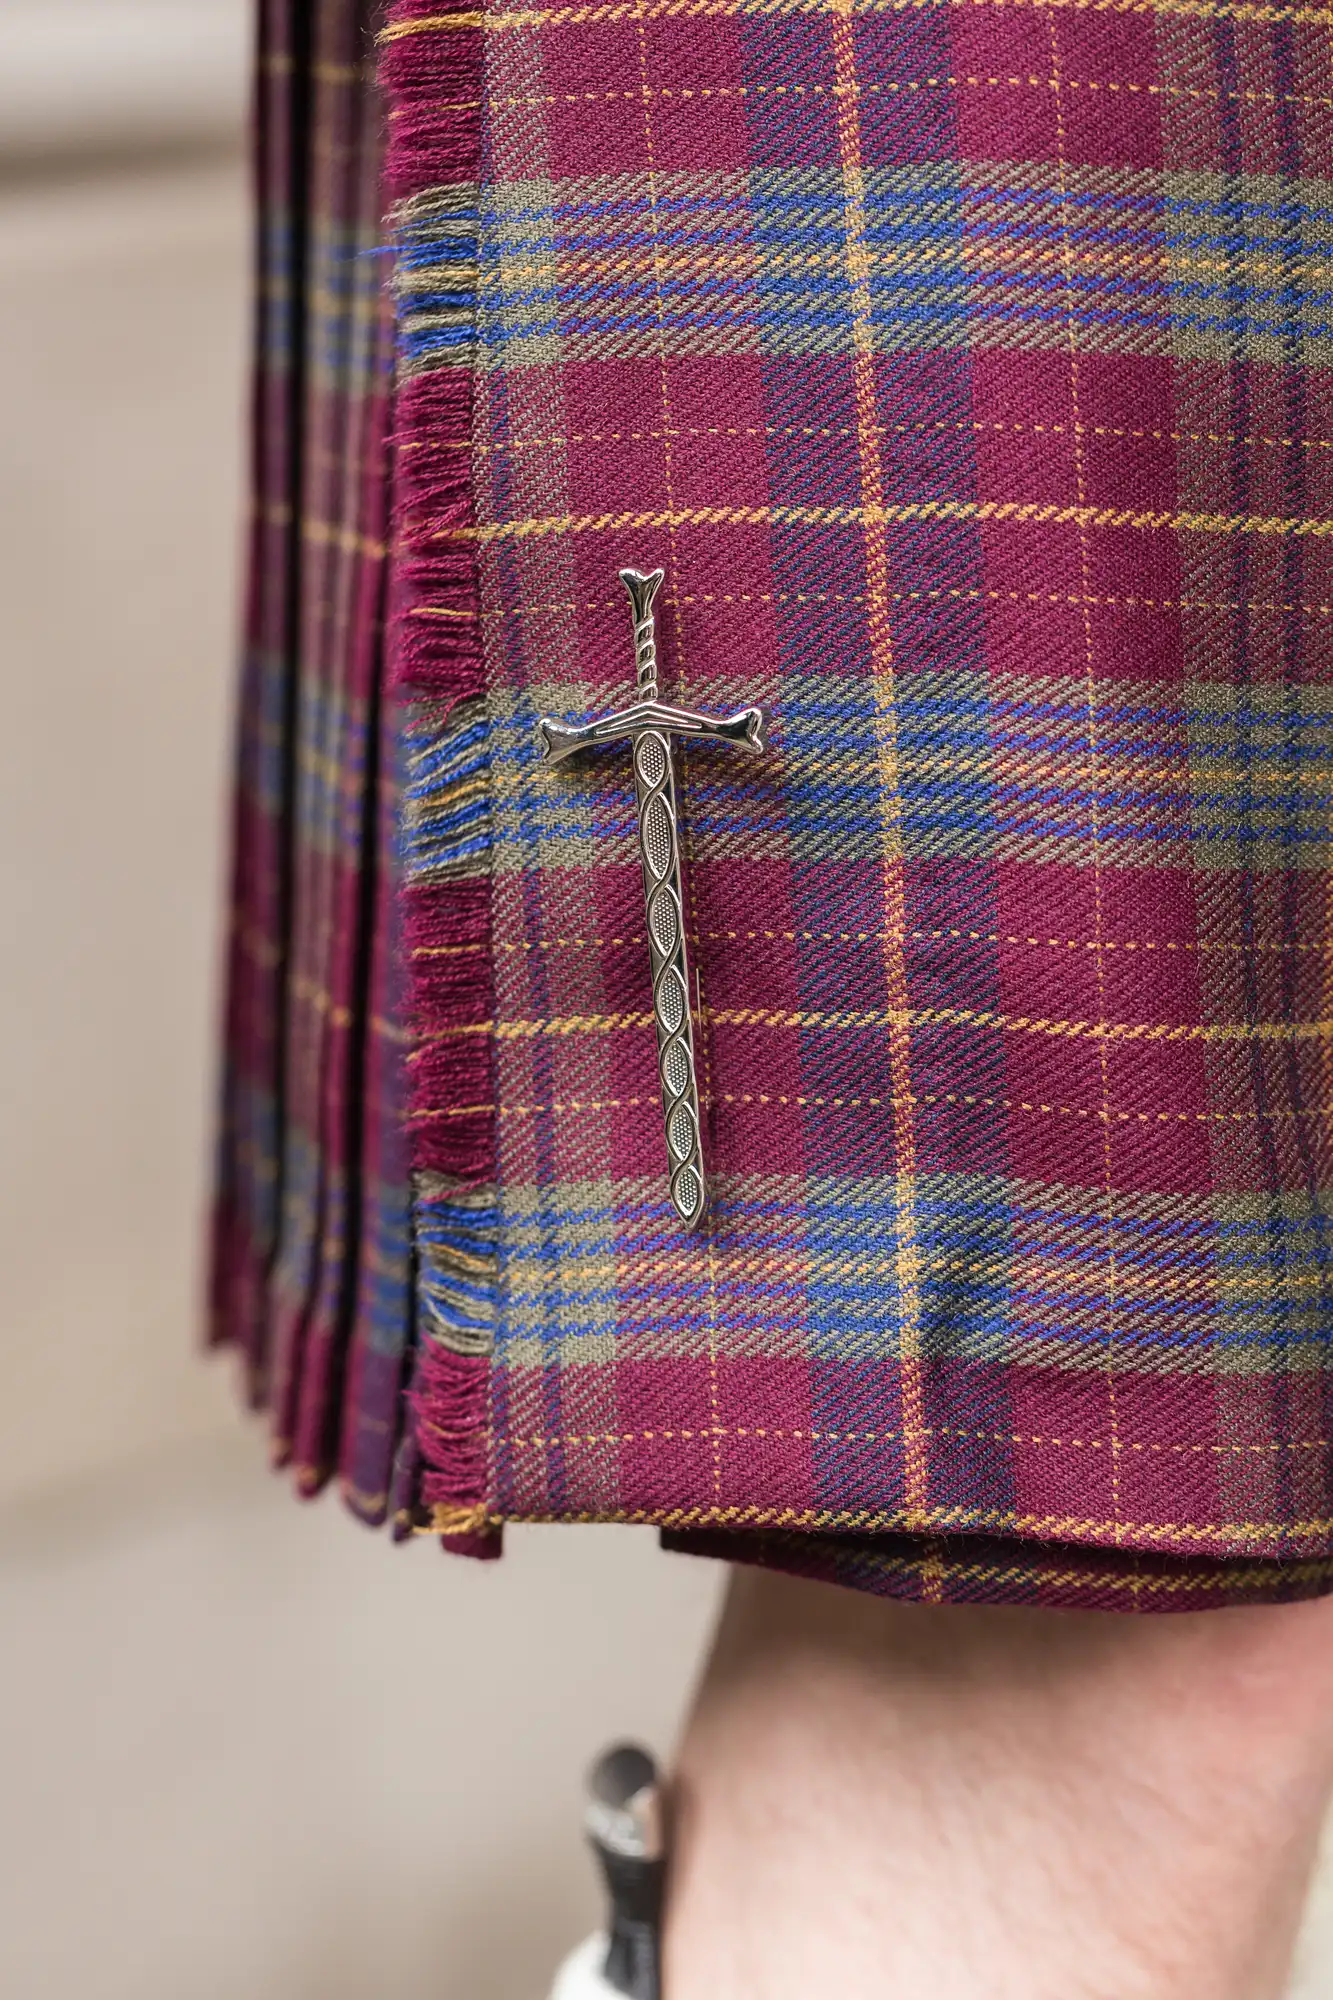 Close-up of a tartan kilt with a decorative silver sword pin attached to the fabric.